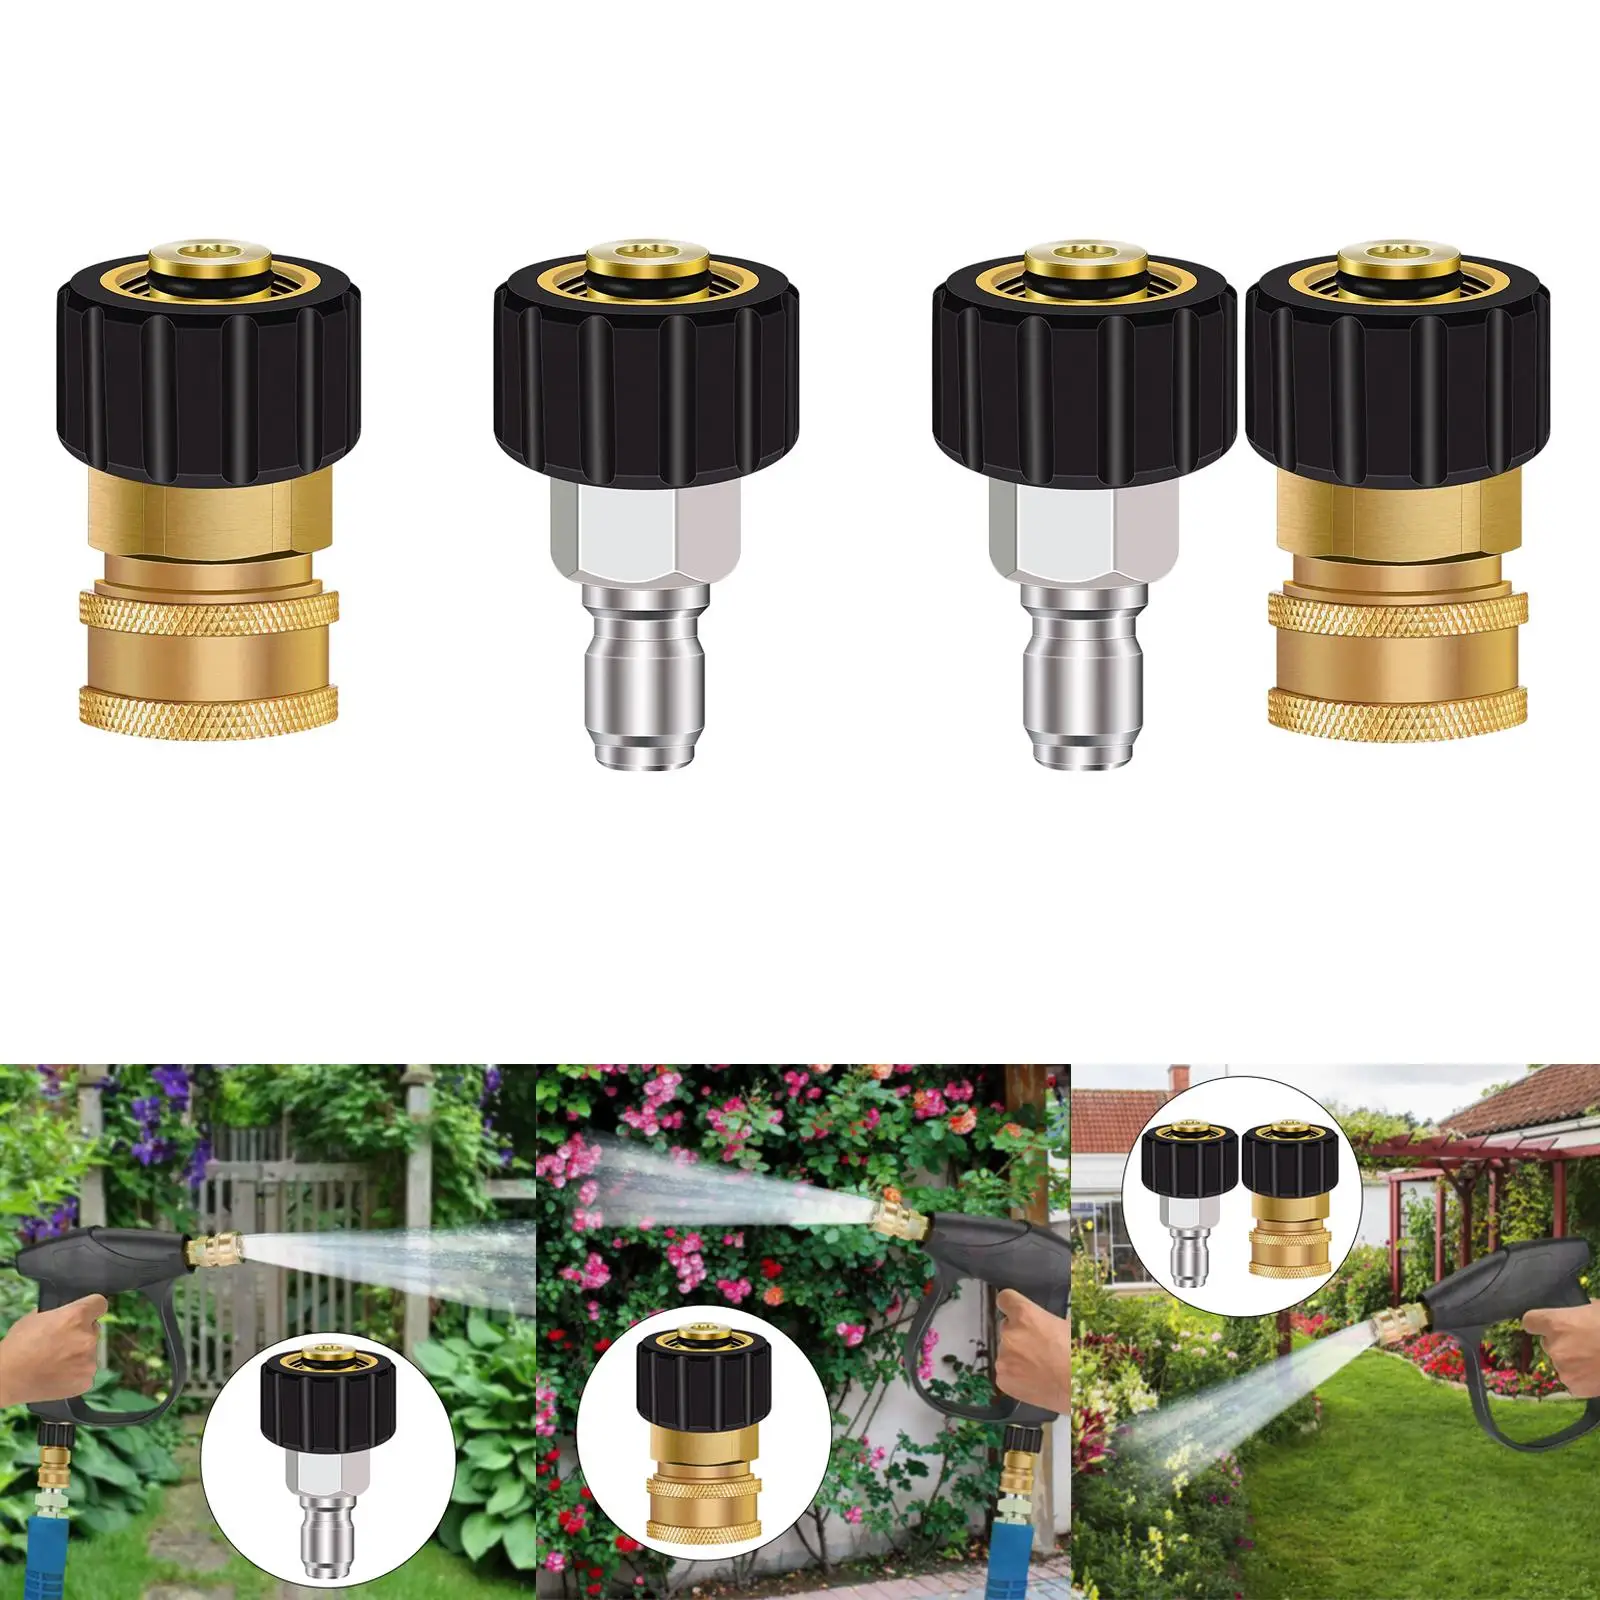 Brass Pressure Washer Adapter Nozzles 3/8 inch to M22 M22 14mm 15mm Quick Release Fittings Hose Coupler for Pressure Washer Gun